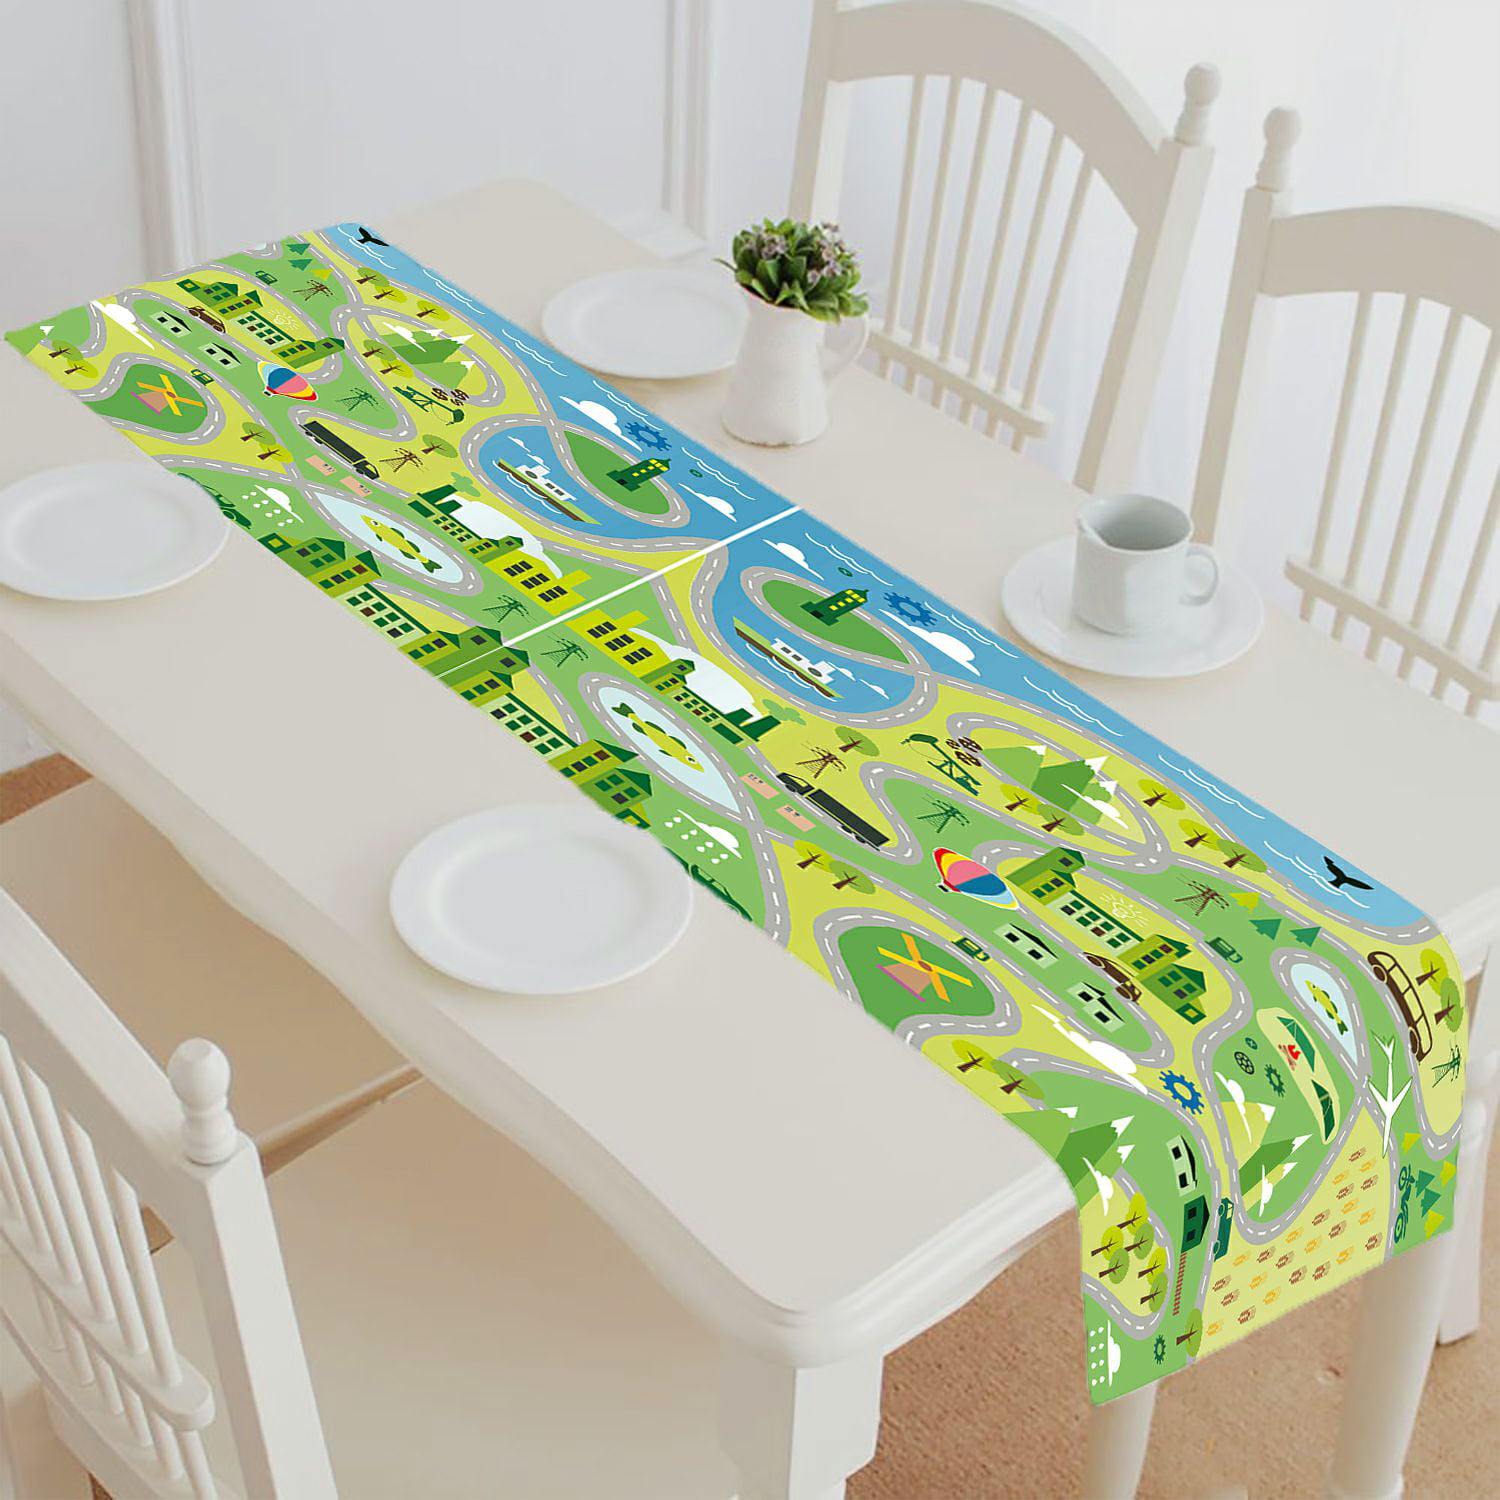 Cotton Linen Table Runner Cartoon Green Dinosaur on White Dresser Scarves Funny Animal Stick Figure Art Table Runners for Dining Room Holiday Party Kitchen Home Decor 13x70In